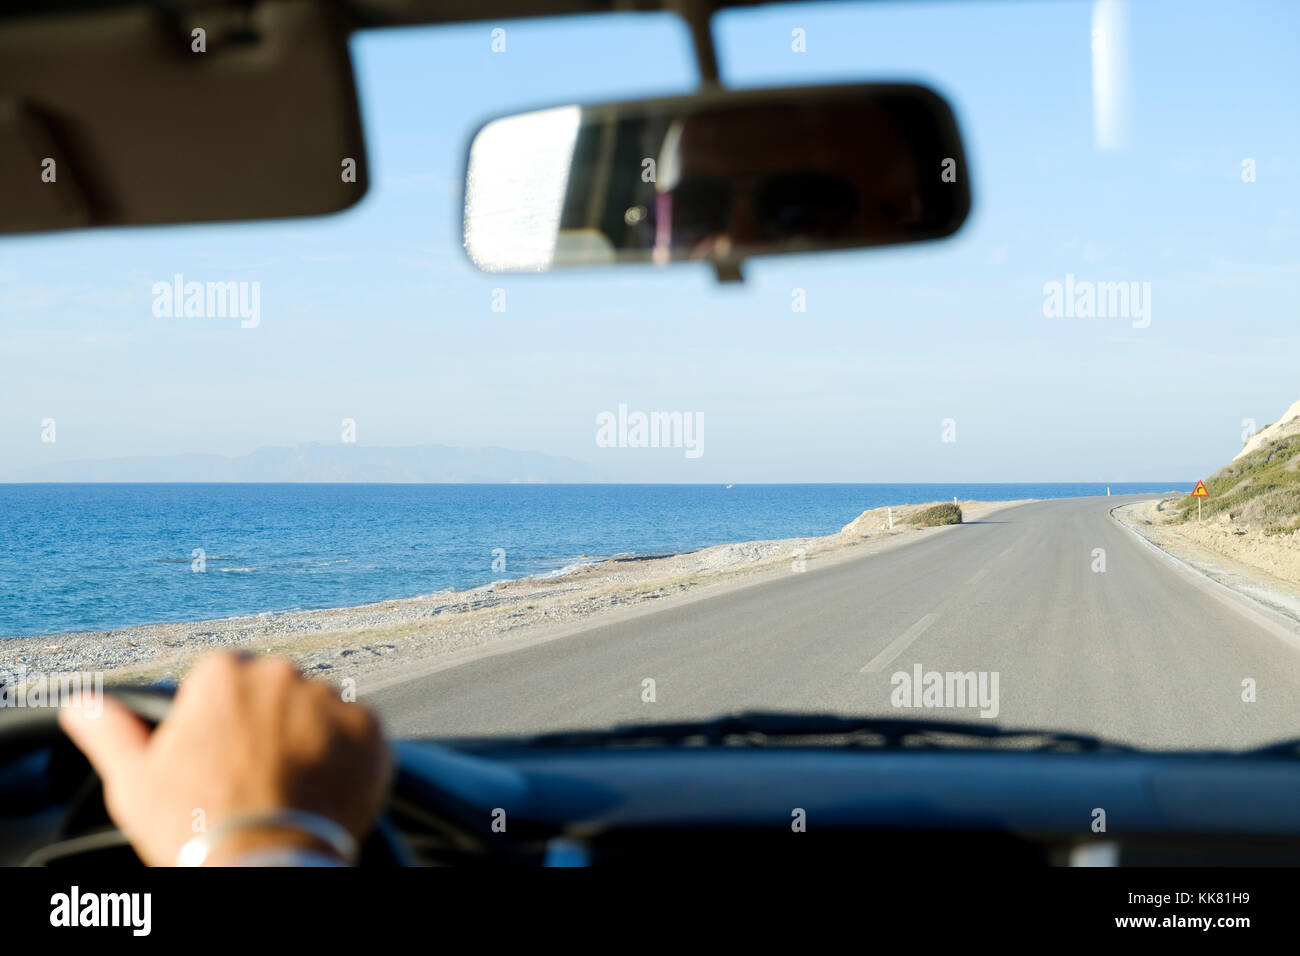 A view from within a car as its driven along a deserted coastal road with a sandy beach and the sea to the side of the road. Stock Photo